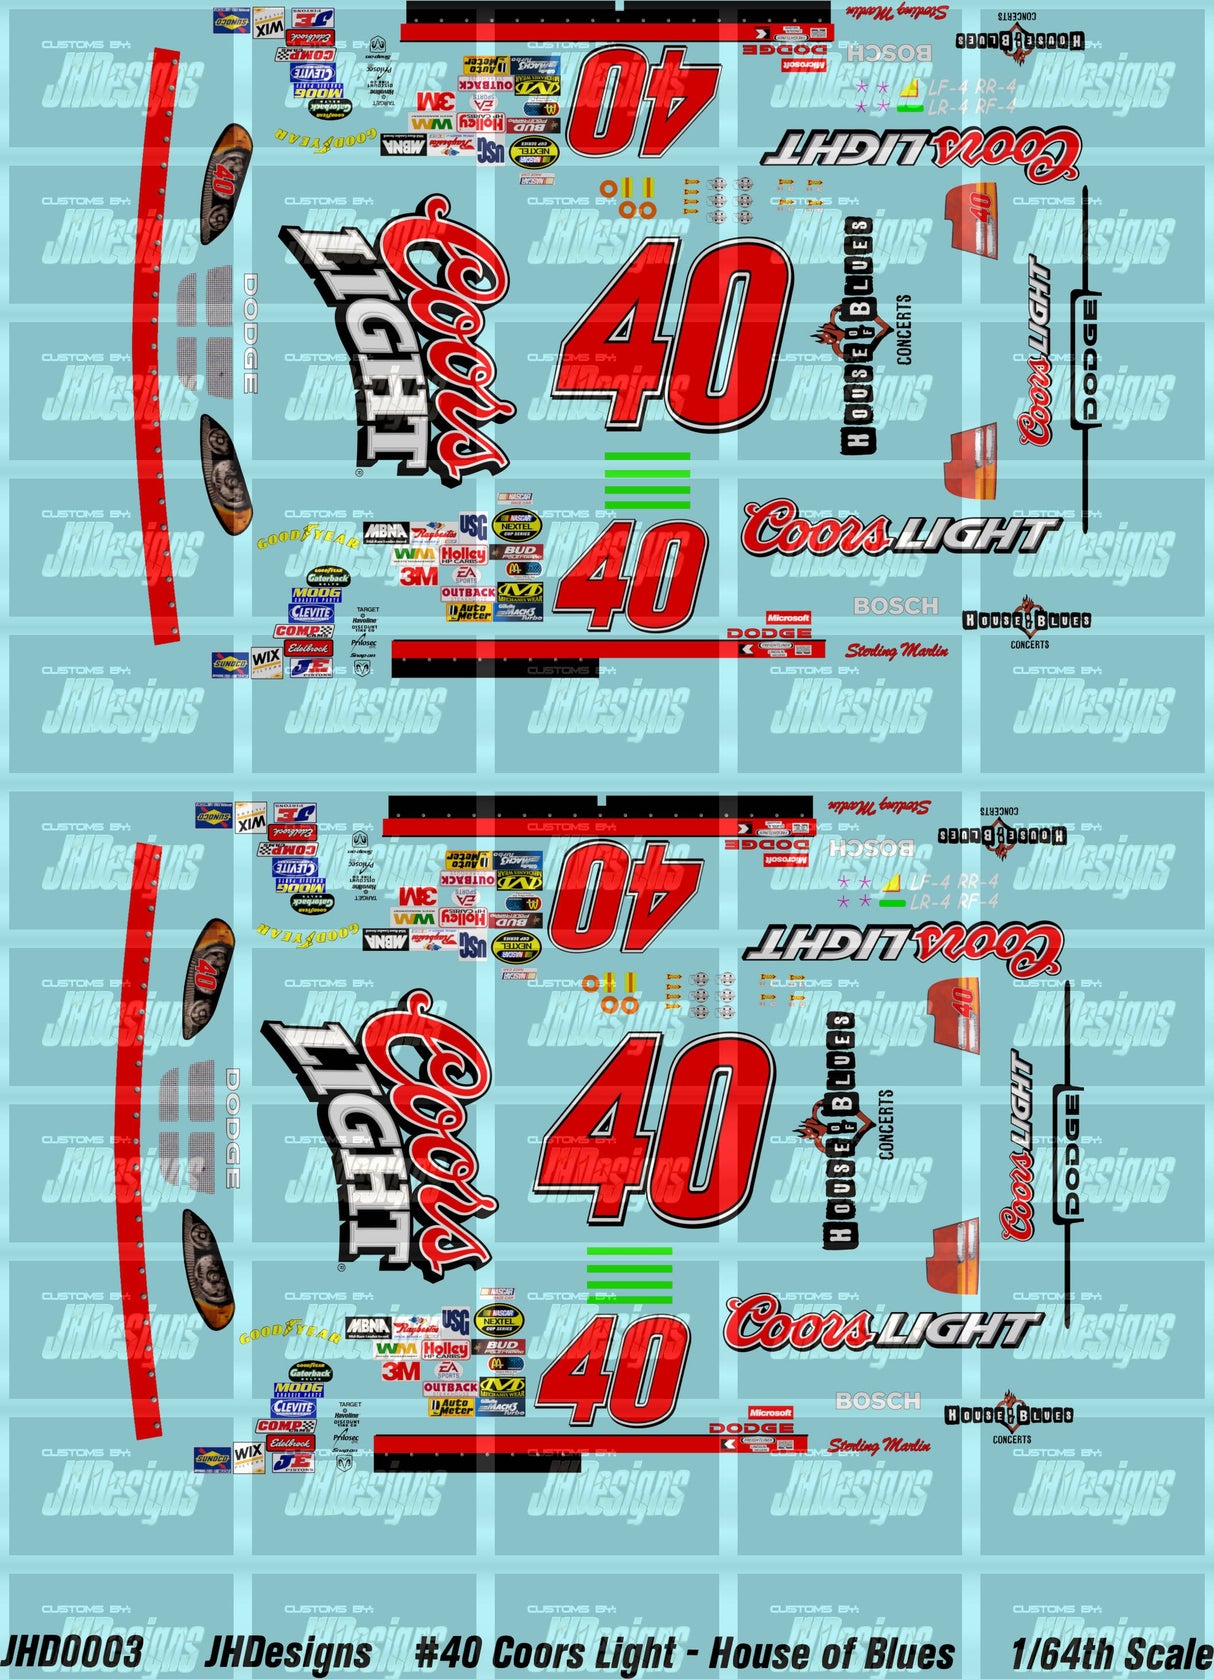 JH Designs Sterling Marlin 2004 CUP #40 Coor's Light - House of Blues Concerts 1:64 Racecar Decal Set